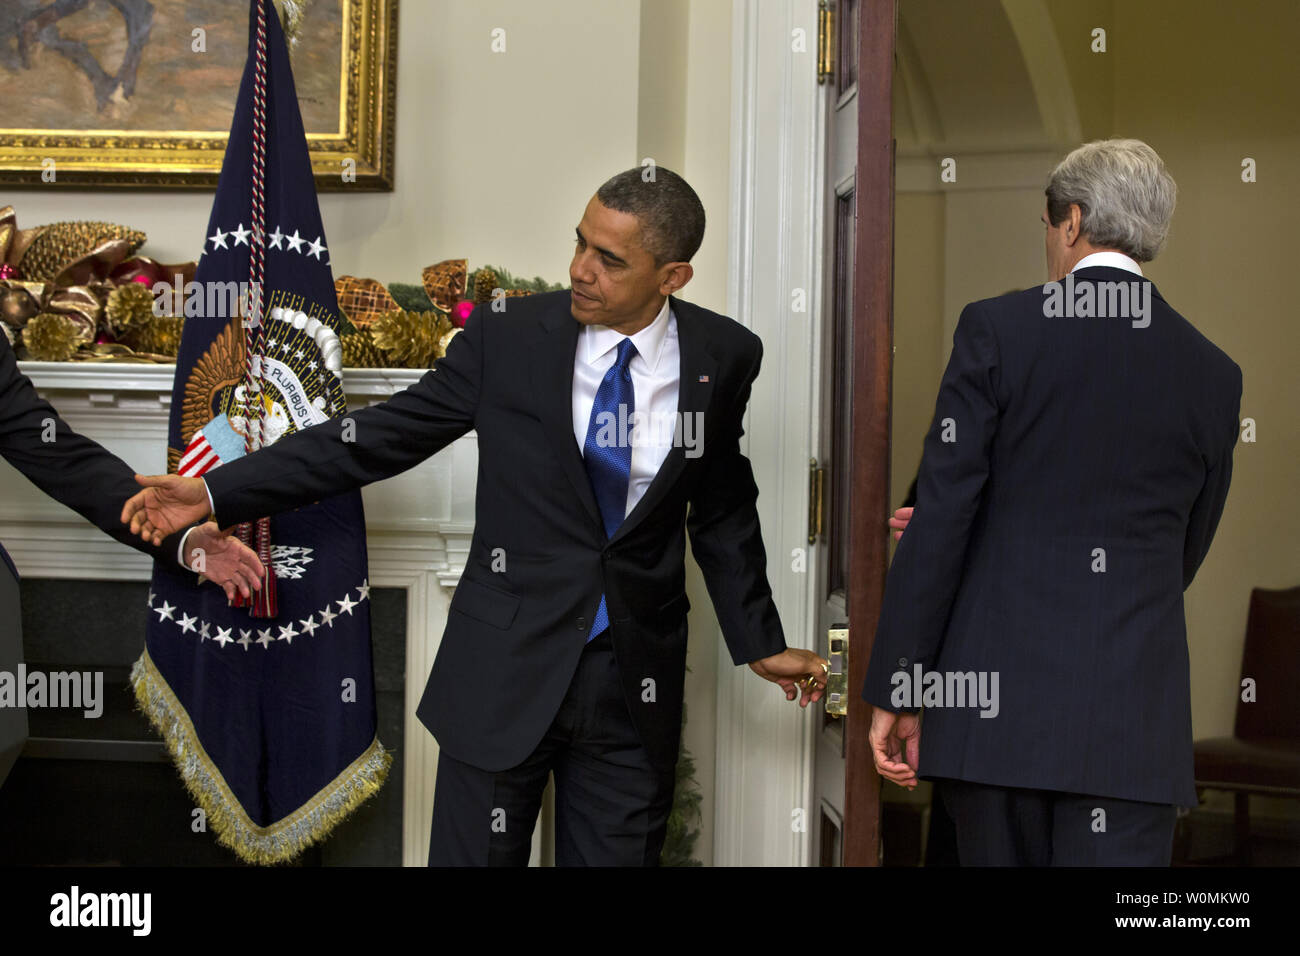 U.S. President Barack Obama (L) prepares to follow Democratic Senator from Massachusetts John Kerry (R) out the door of the Roosevelt Room after nominating him to be the next Secretary of State at White House in Washington, DC on December 21, 2012. If confirmed, Kerry will replace retiring Secretary of State Hillary Clinton early in 2013.  UPI/Jim Lo Scalzo Stock Photo